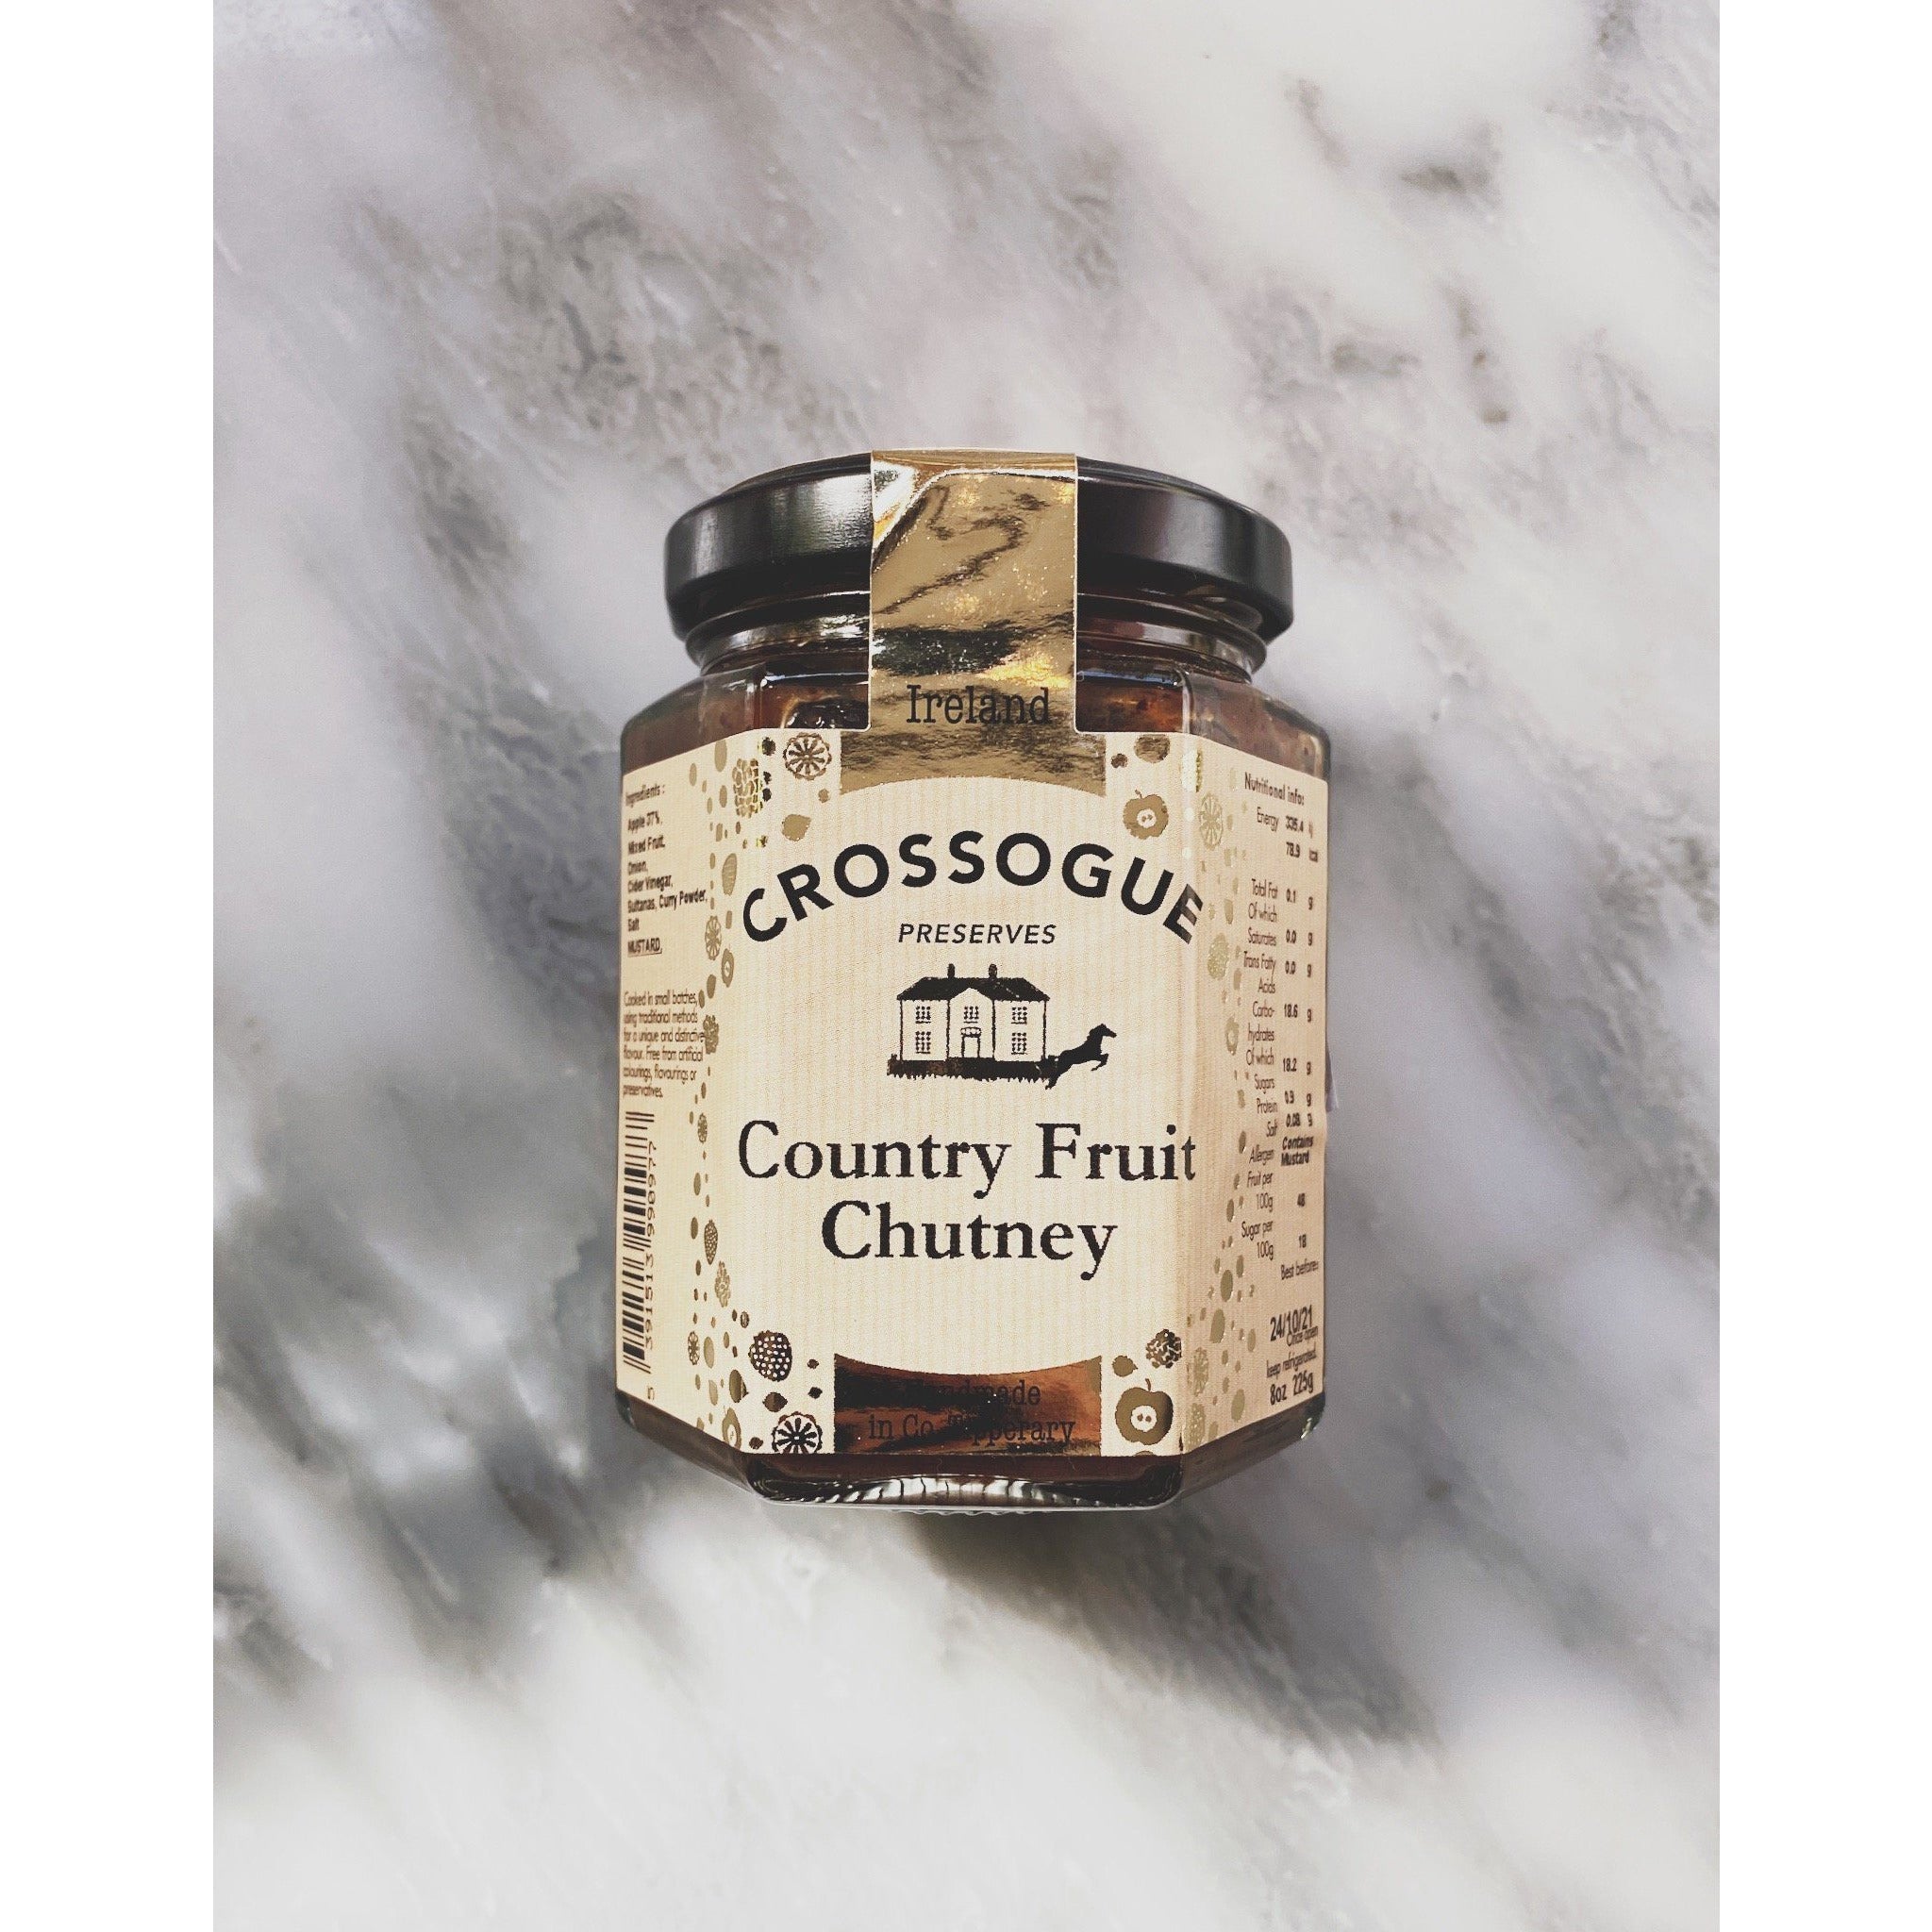 Crossogue Preserves - Country Fruit Chutney - Kate's Kitchen